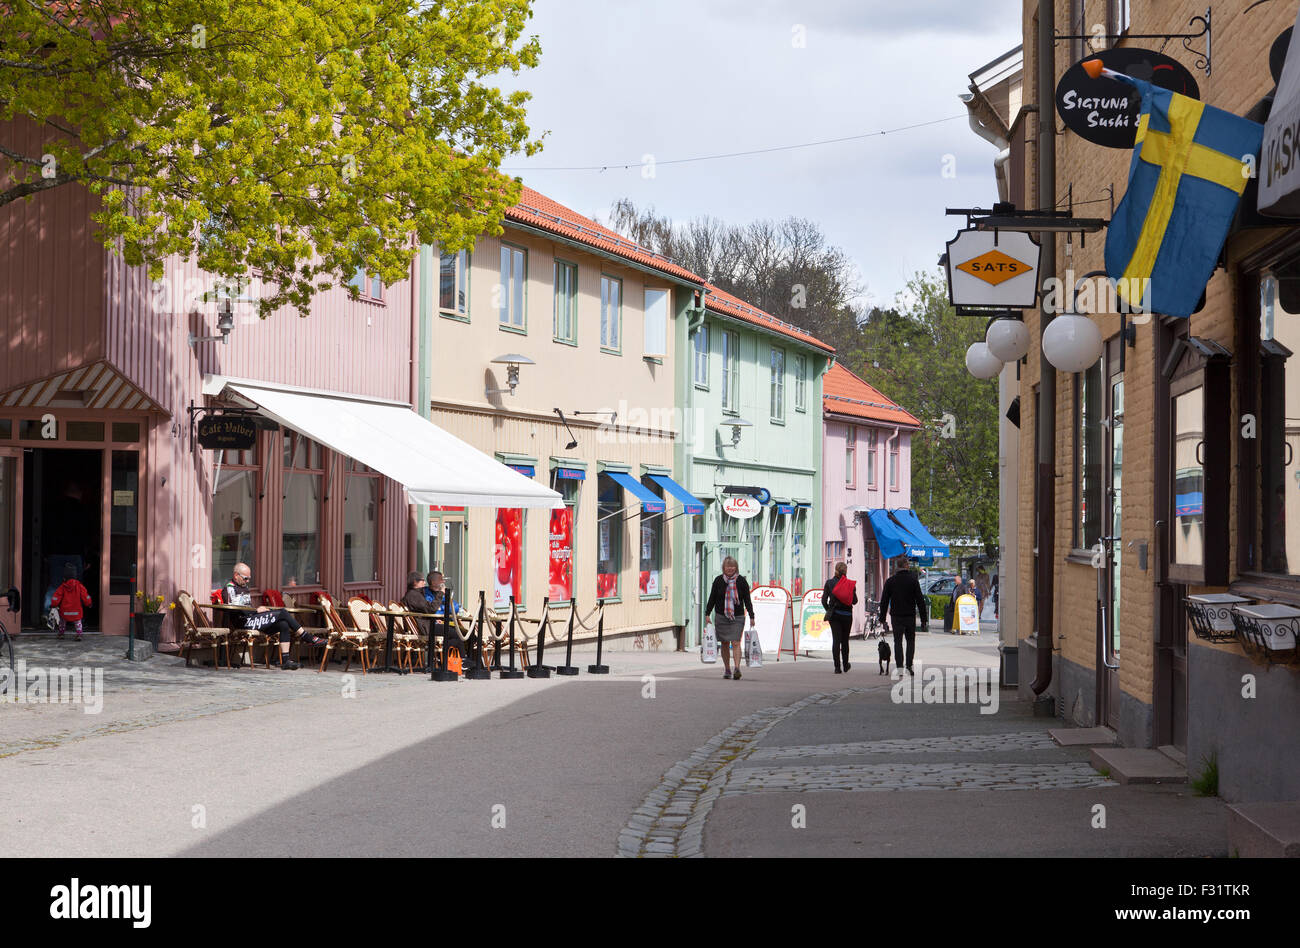 SIGTUNA, SWEDEN ON MAY 03, 2015. Street view of a small town in early spring. Unidentified people. Editorial use. Stock Photo